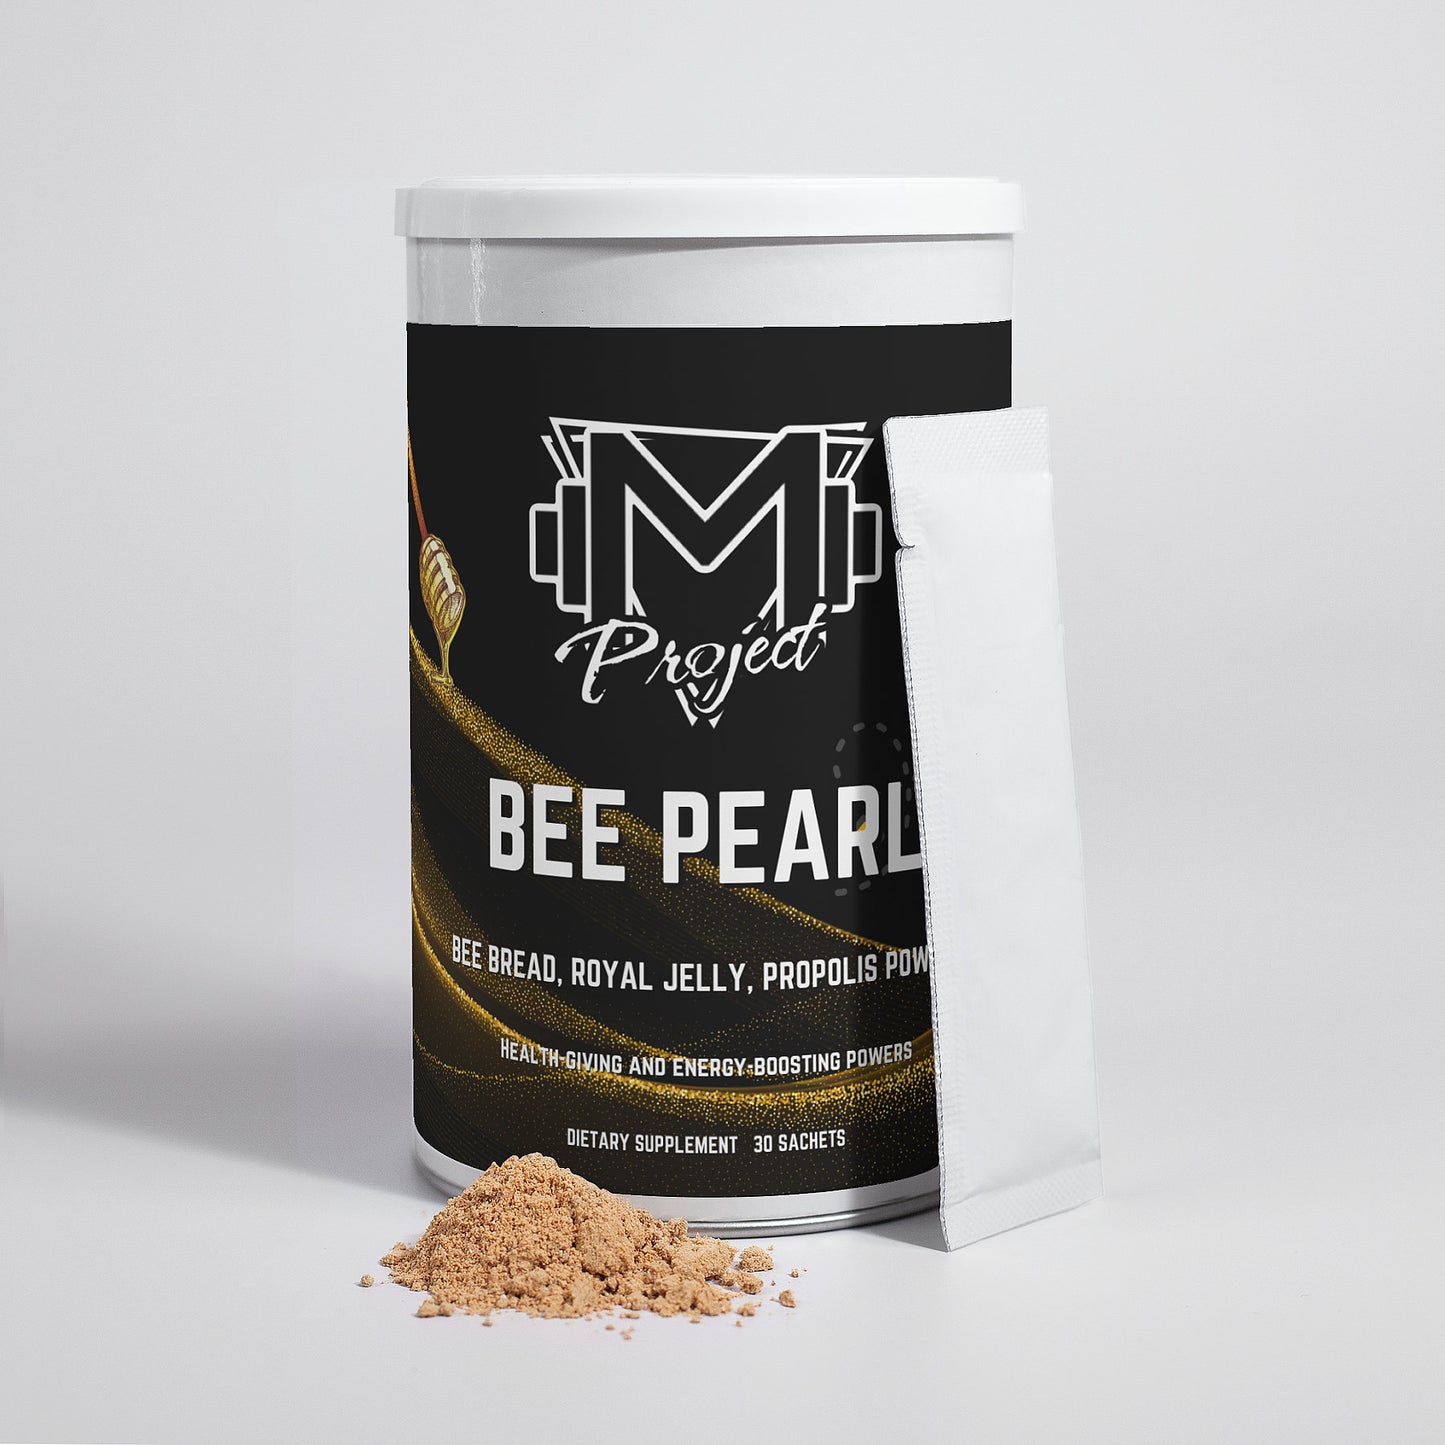 Bee Pearl Powder by Project M